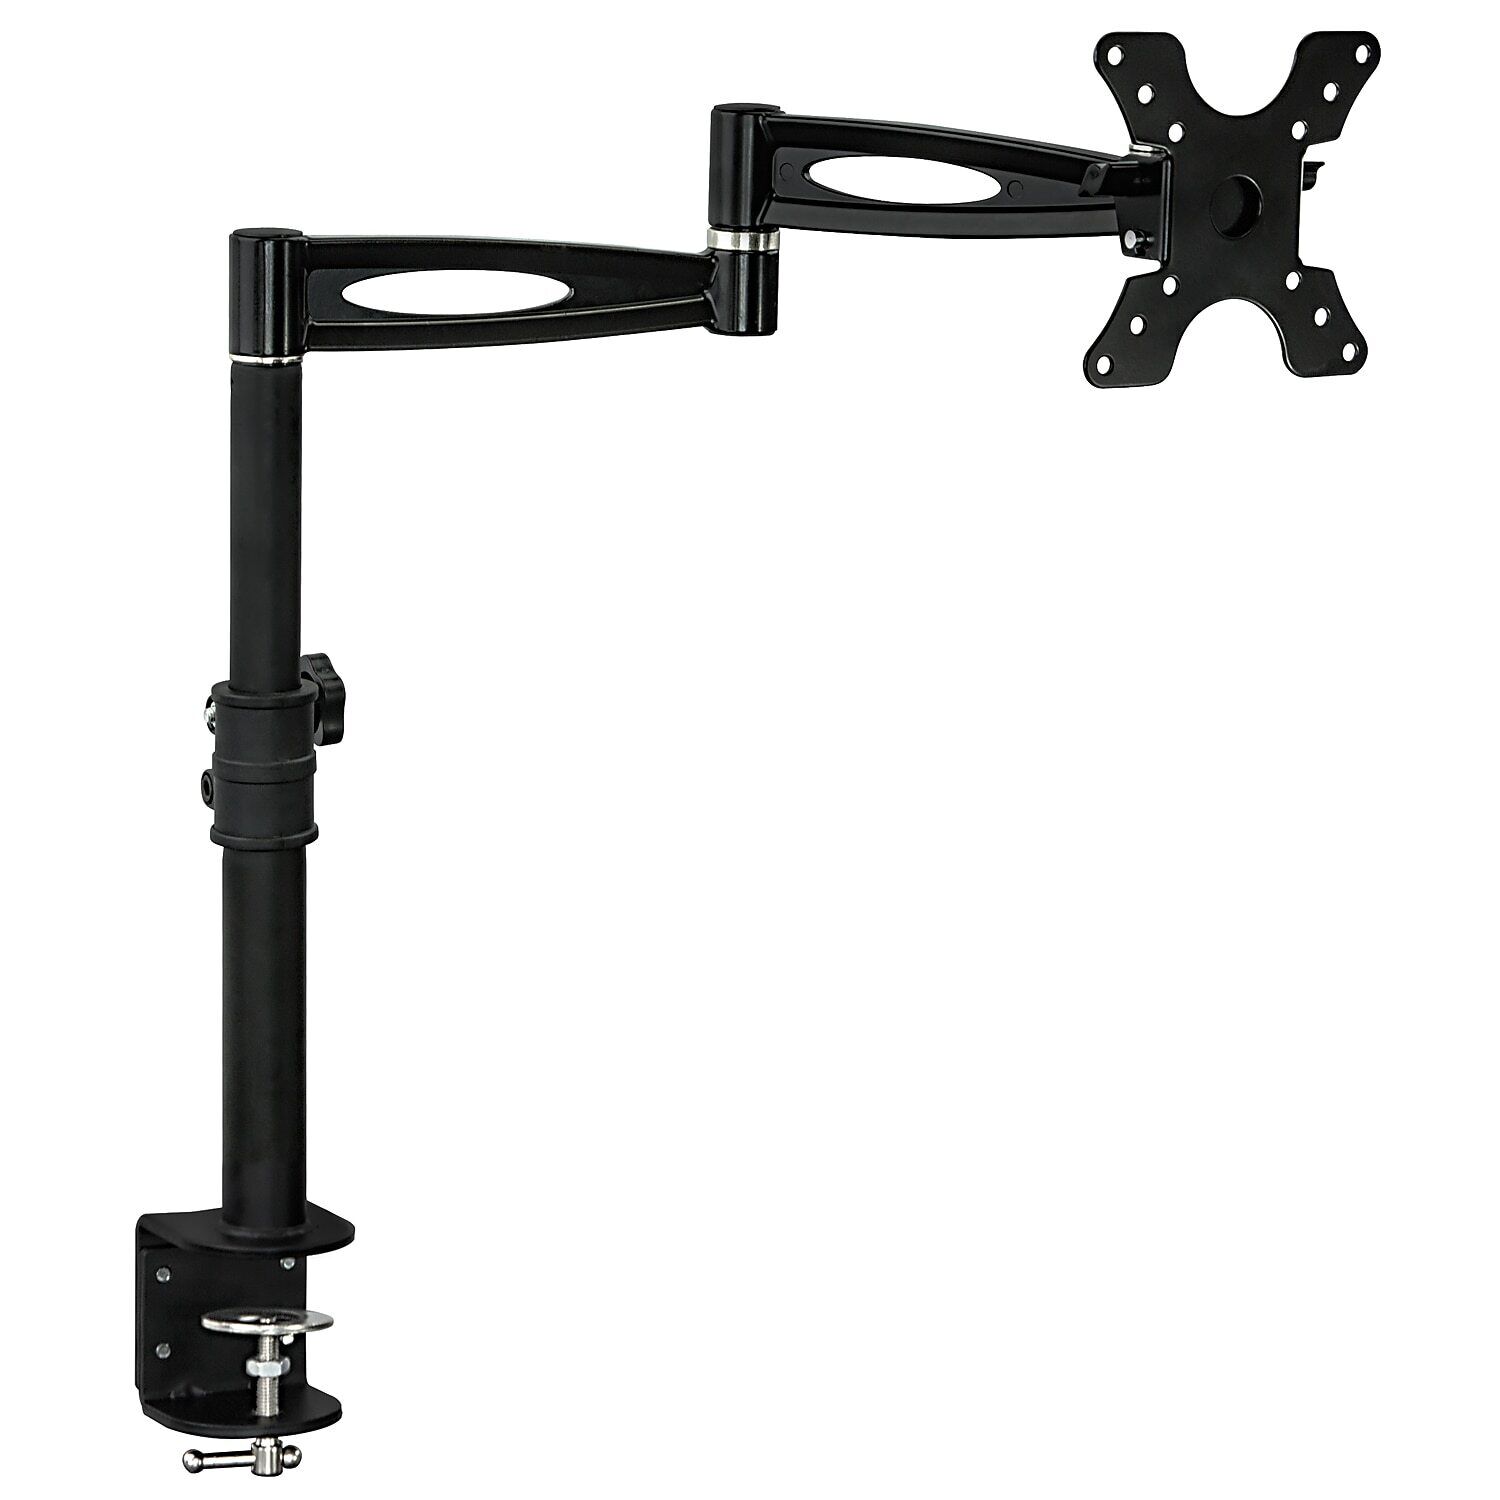 Mount-It Mount-lt Adjustable Monitor Arm Up to 30